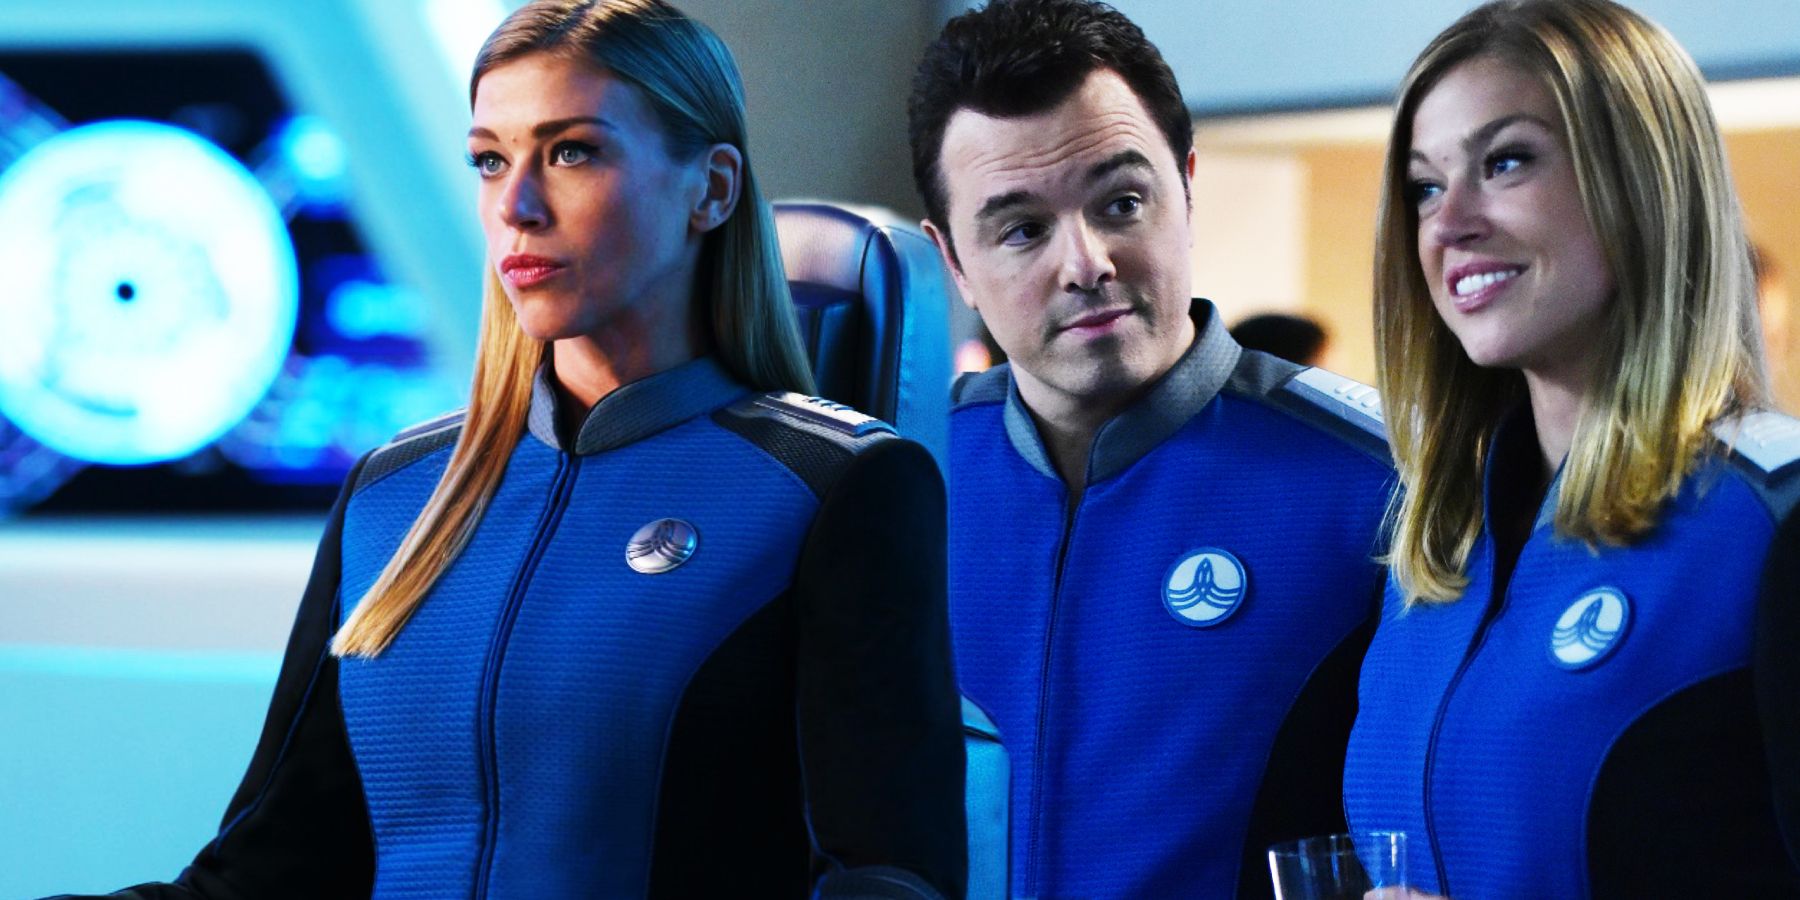 Adrianne Palicki as Kelly Grayson in the Orville's captain's chair